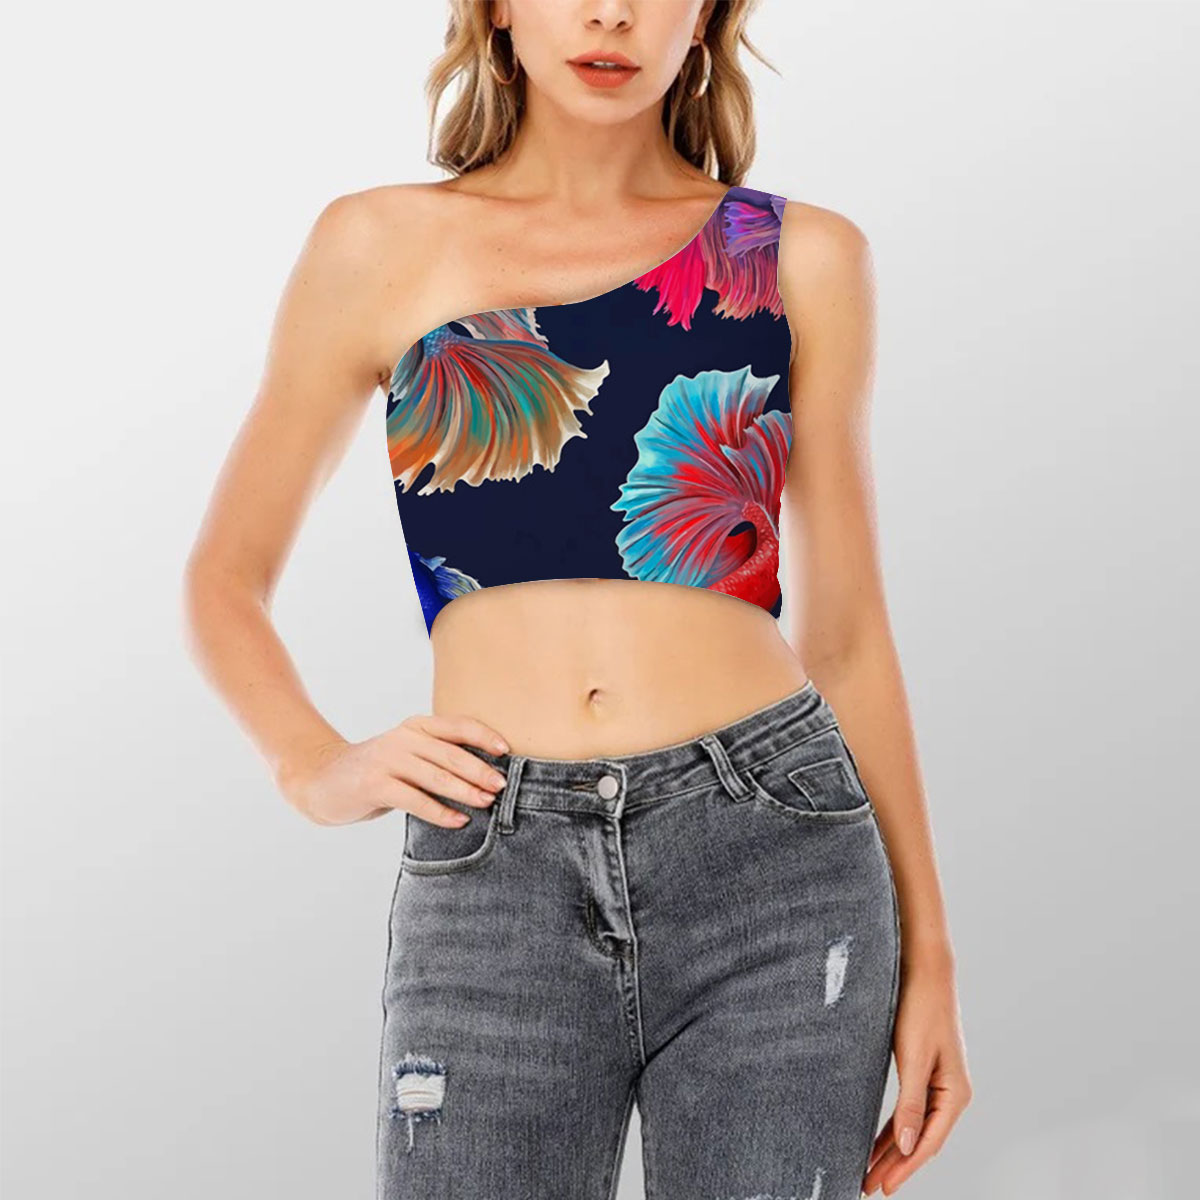 Iconic Four Betta Fish Shoulder Cropped Top